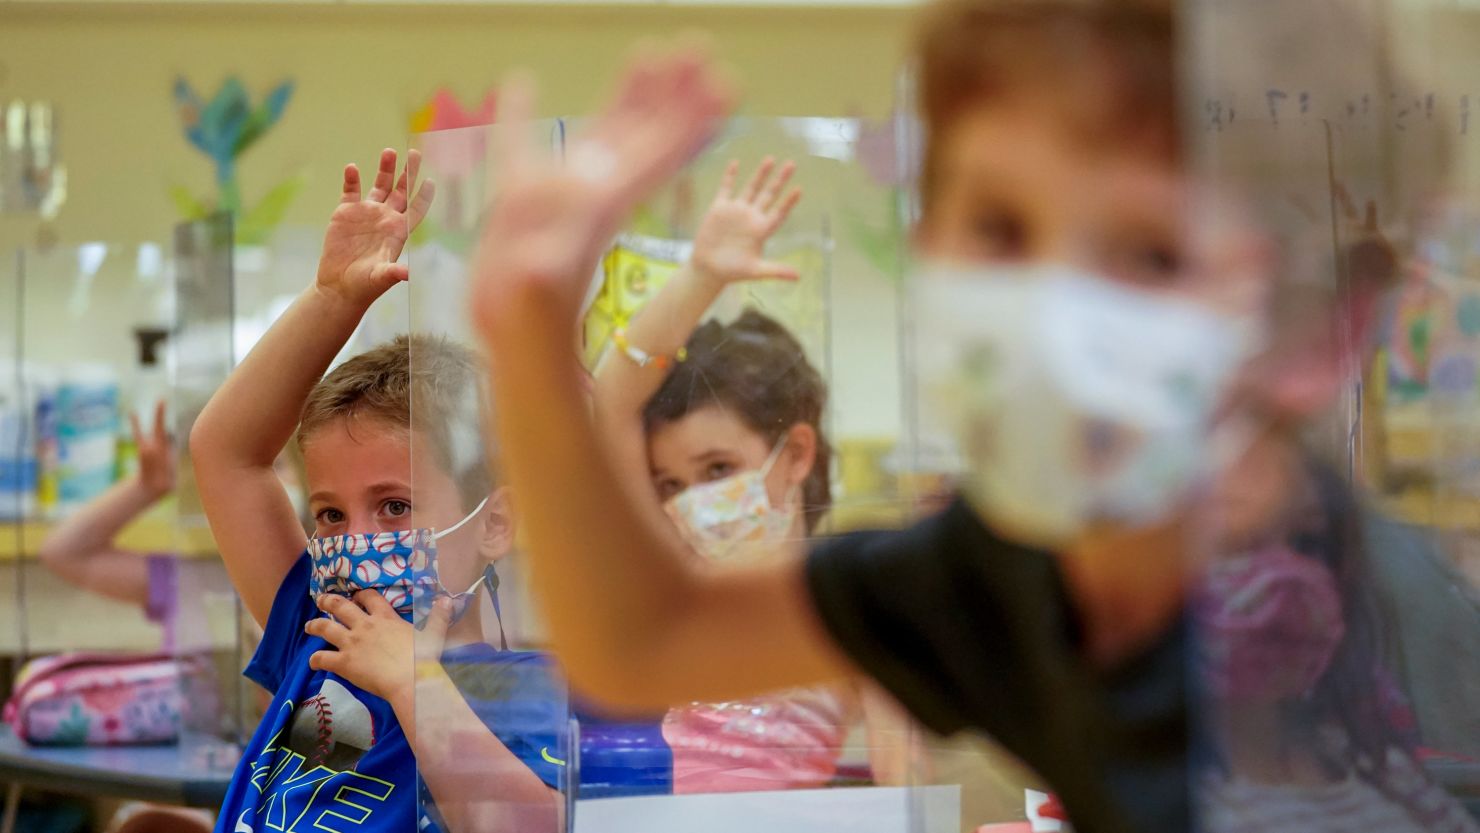 Kindergarten students wearing masks and separated by plexiglass at Milton Elementary School in Rye, New York, on Tuesday, May 18.